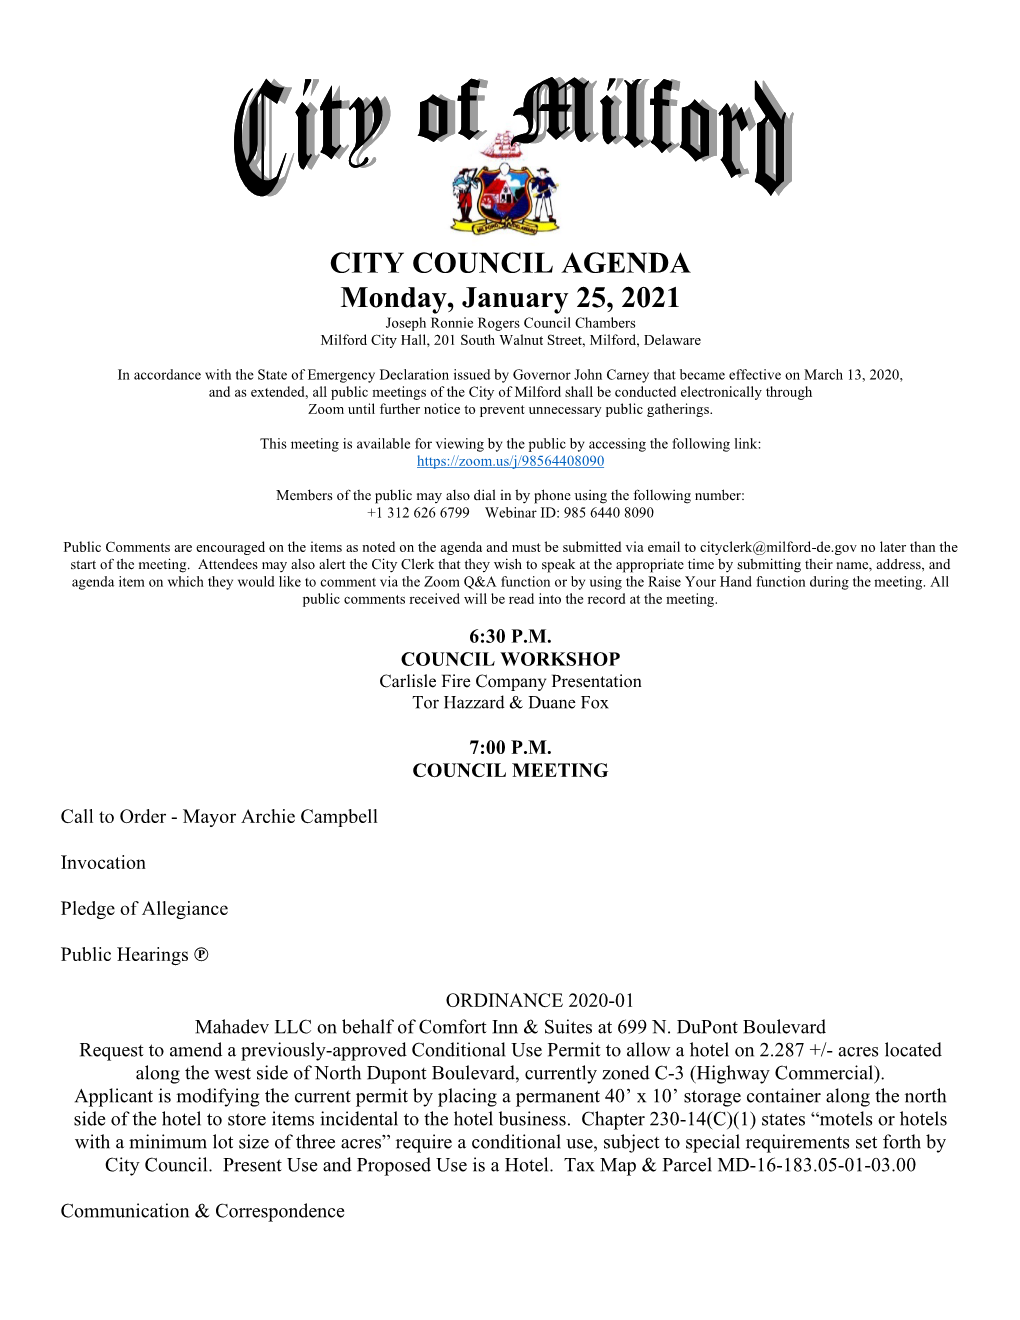 CITY COUNCIL AGENDA Monday, January 25, 2021 Joseph Ronnie Rogers Council Chambers Milford City Hall, 201 South Walnut Street, Milford, Delaware